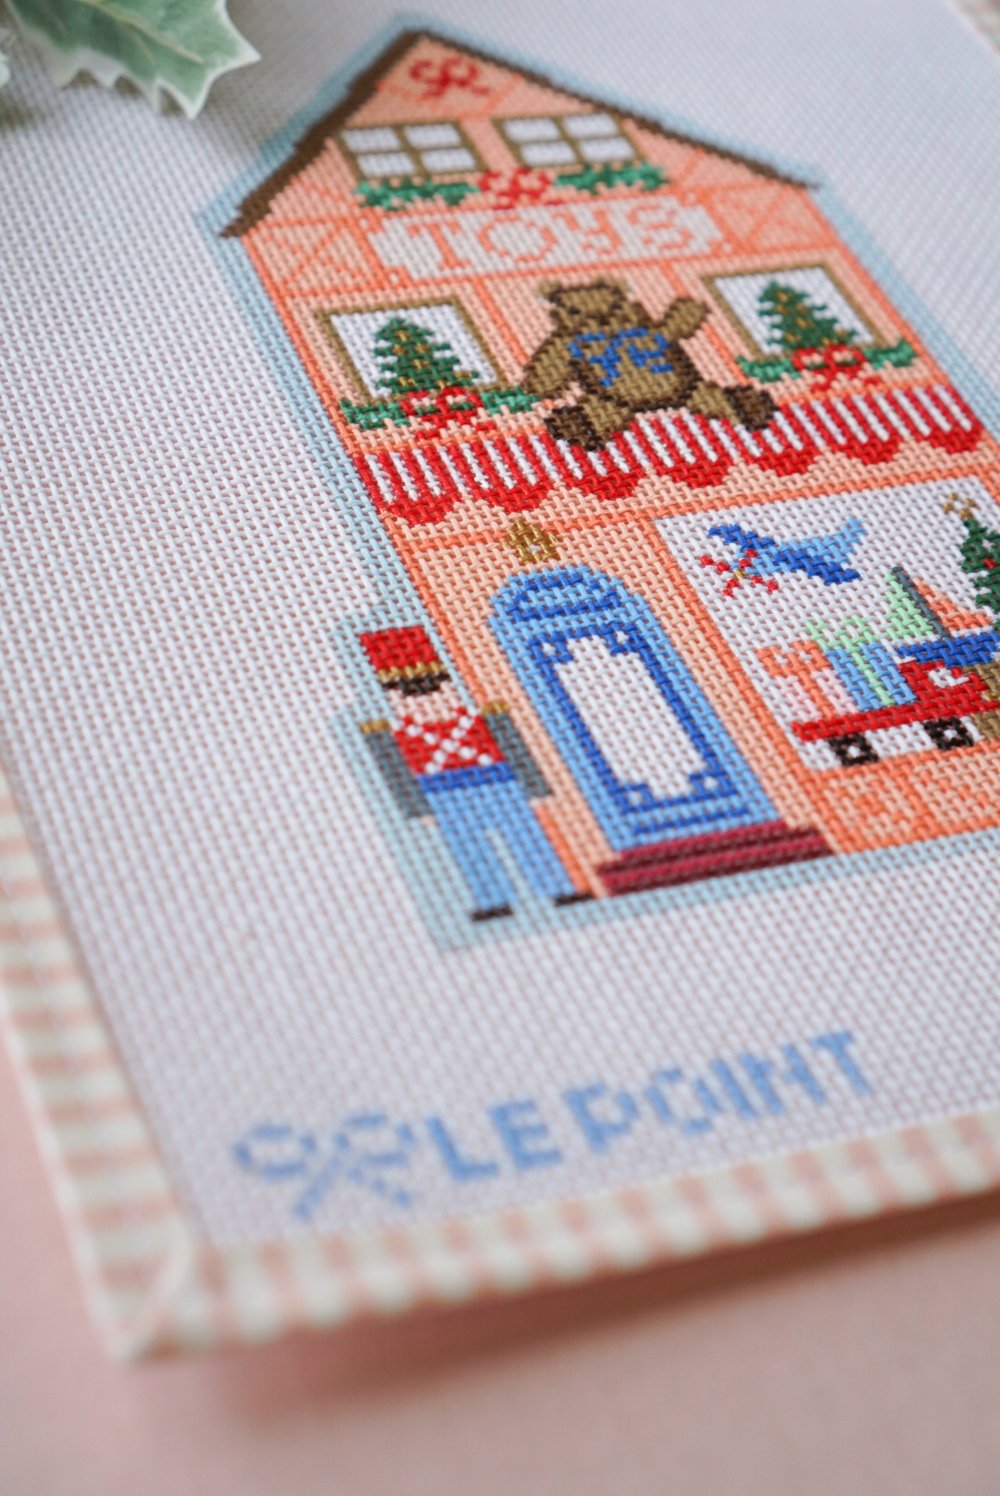 Le Point Studio on Instagram: I am incredibly excited to announce that we  will be launching a line of kids needlepoint kits! Meet Little Le Point. 💕  I have been working on